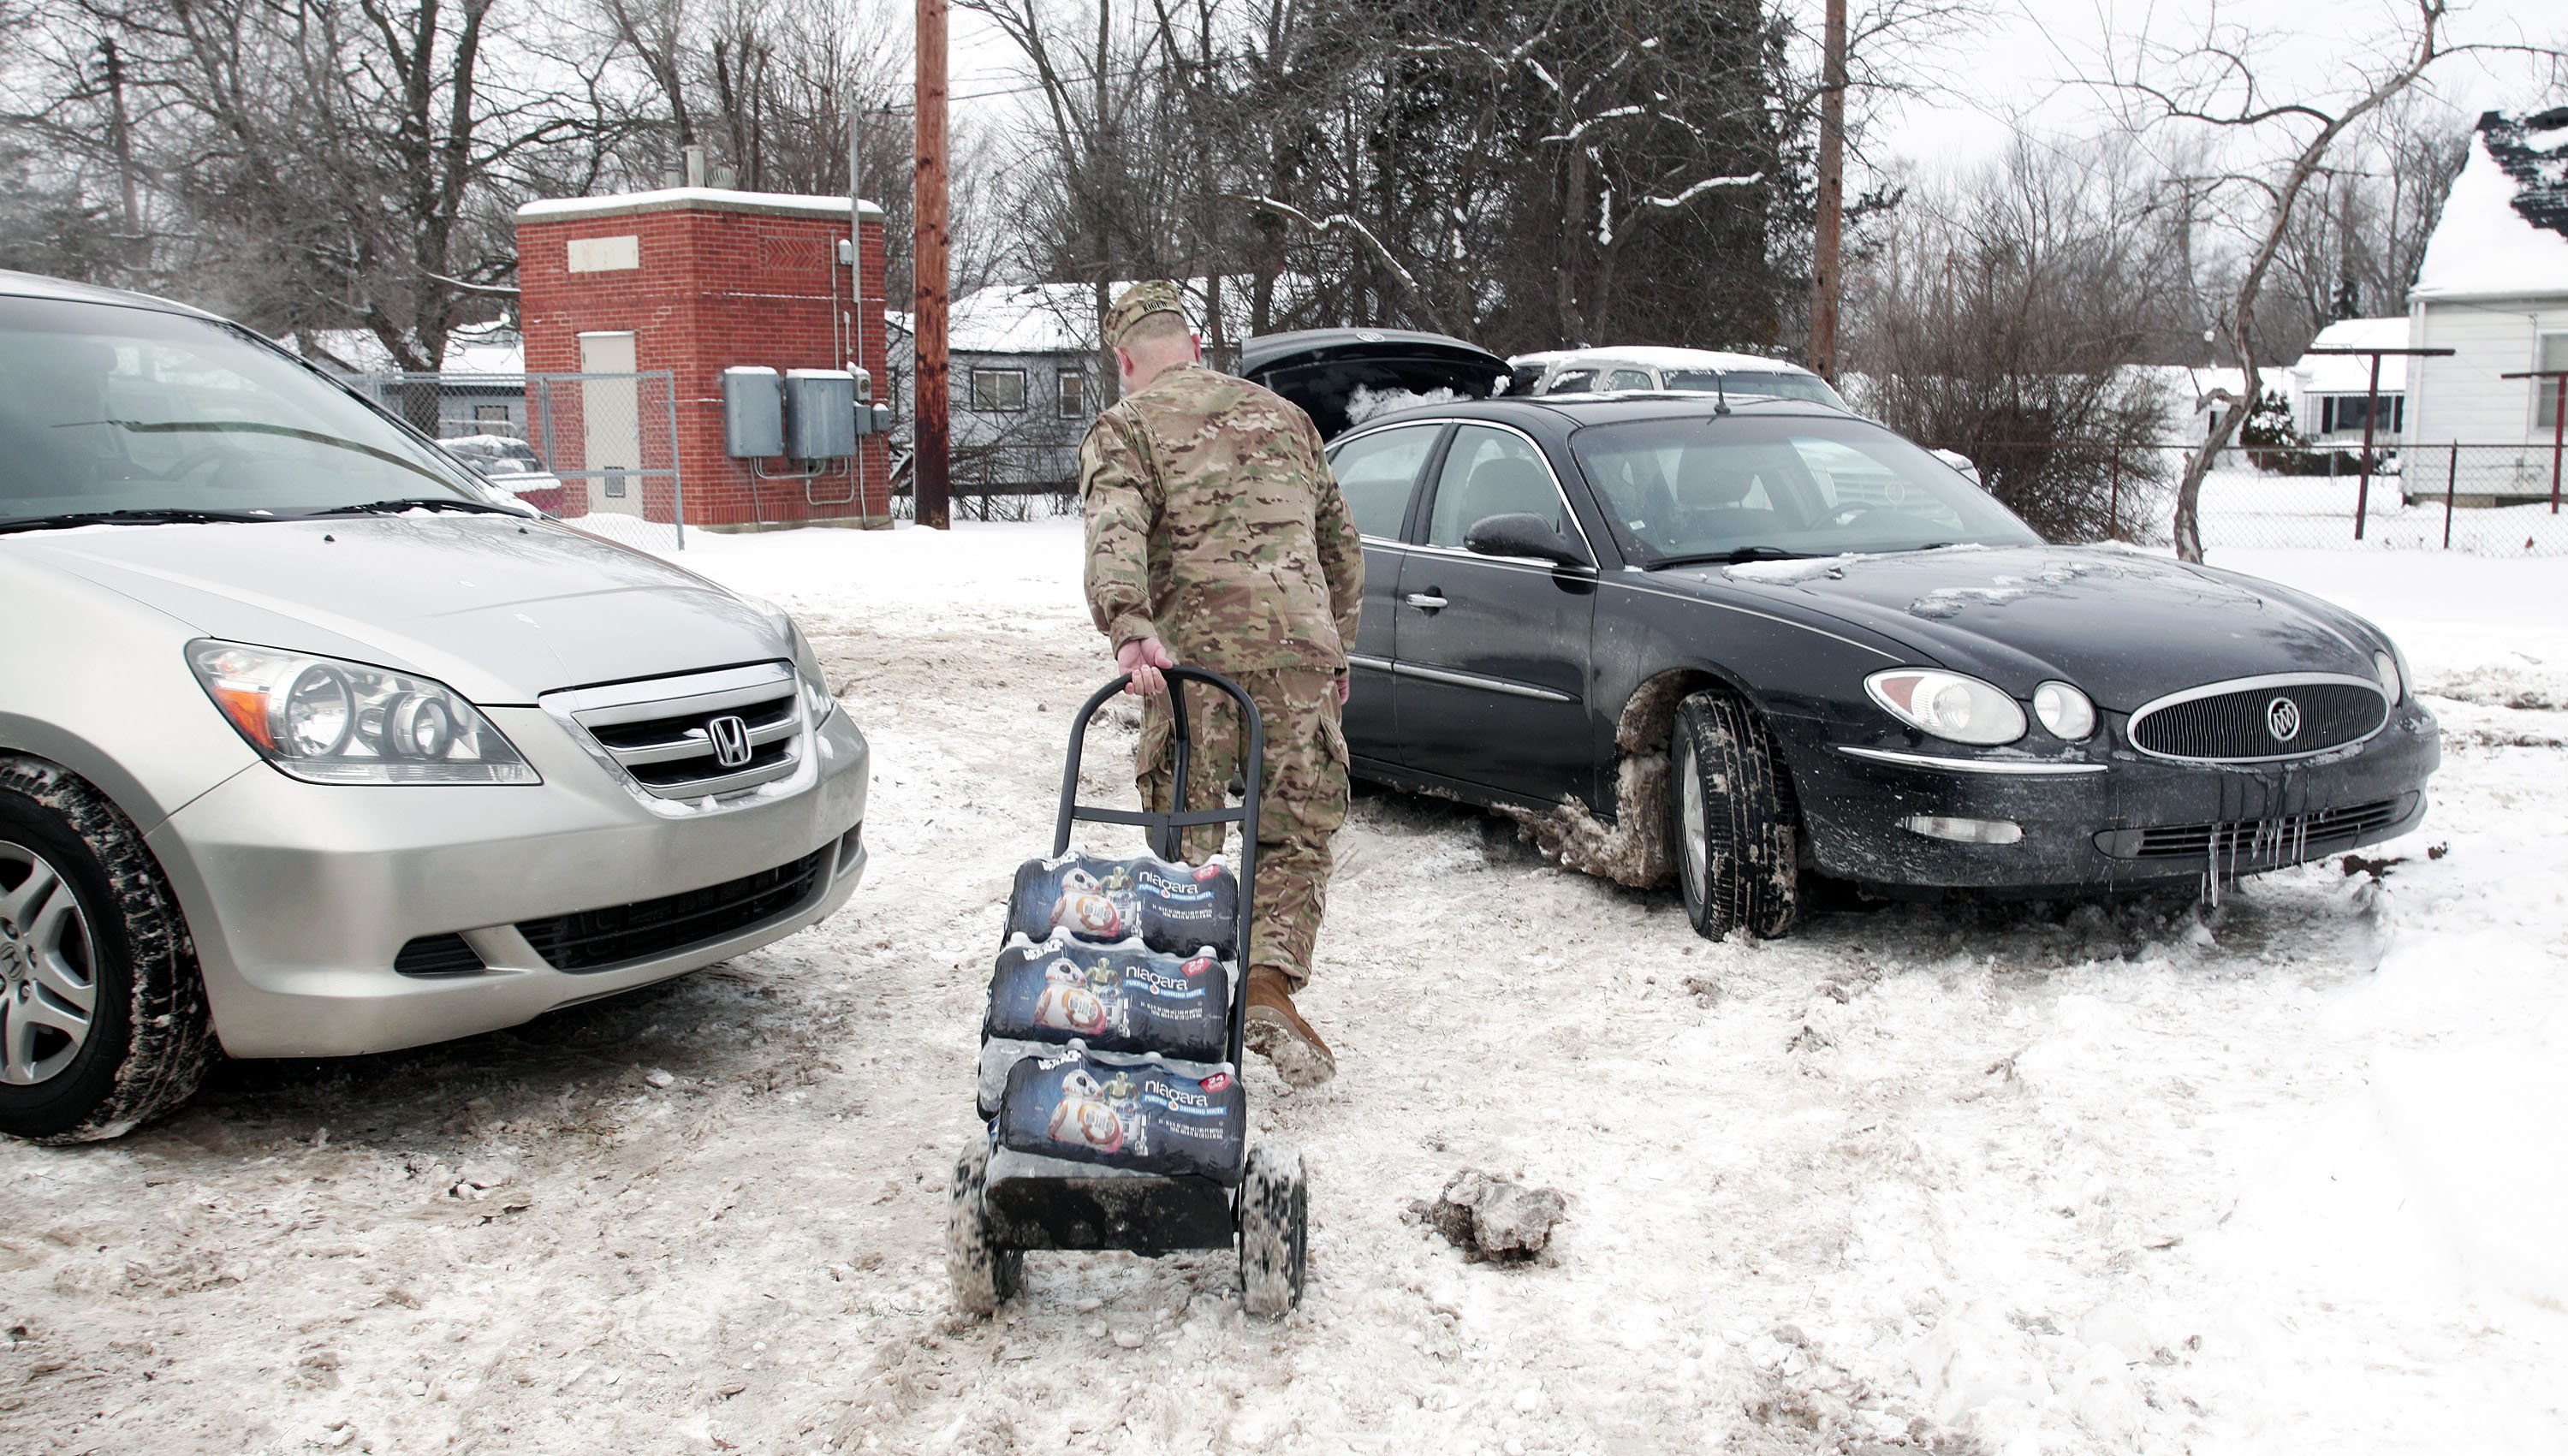 Michigan National Guard Staff Sergeant Steve Kiger of Beaverton, Michigan, helps Christine Brown of Flint, Michigan take bottled water out to her car after she received it at a Flint Fire Station on Jan 13, 2016 in Flint, Michigan. (Bill Pugliano—Getty Images)